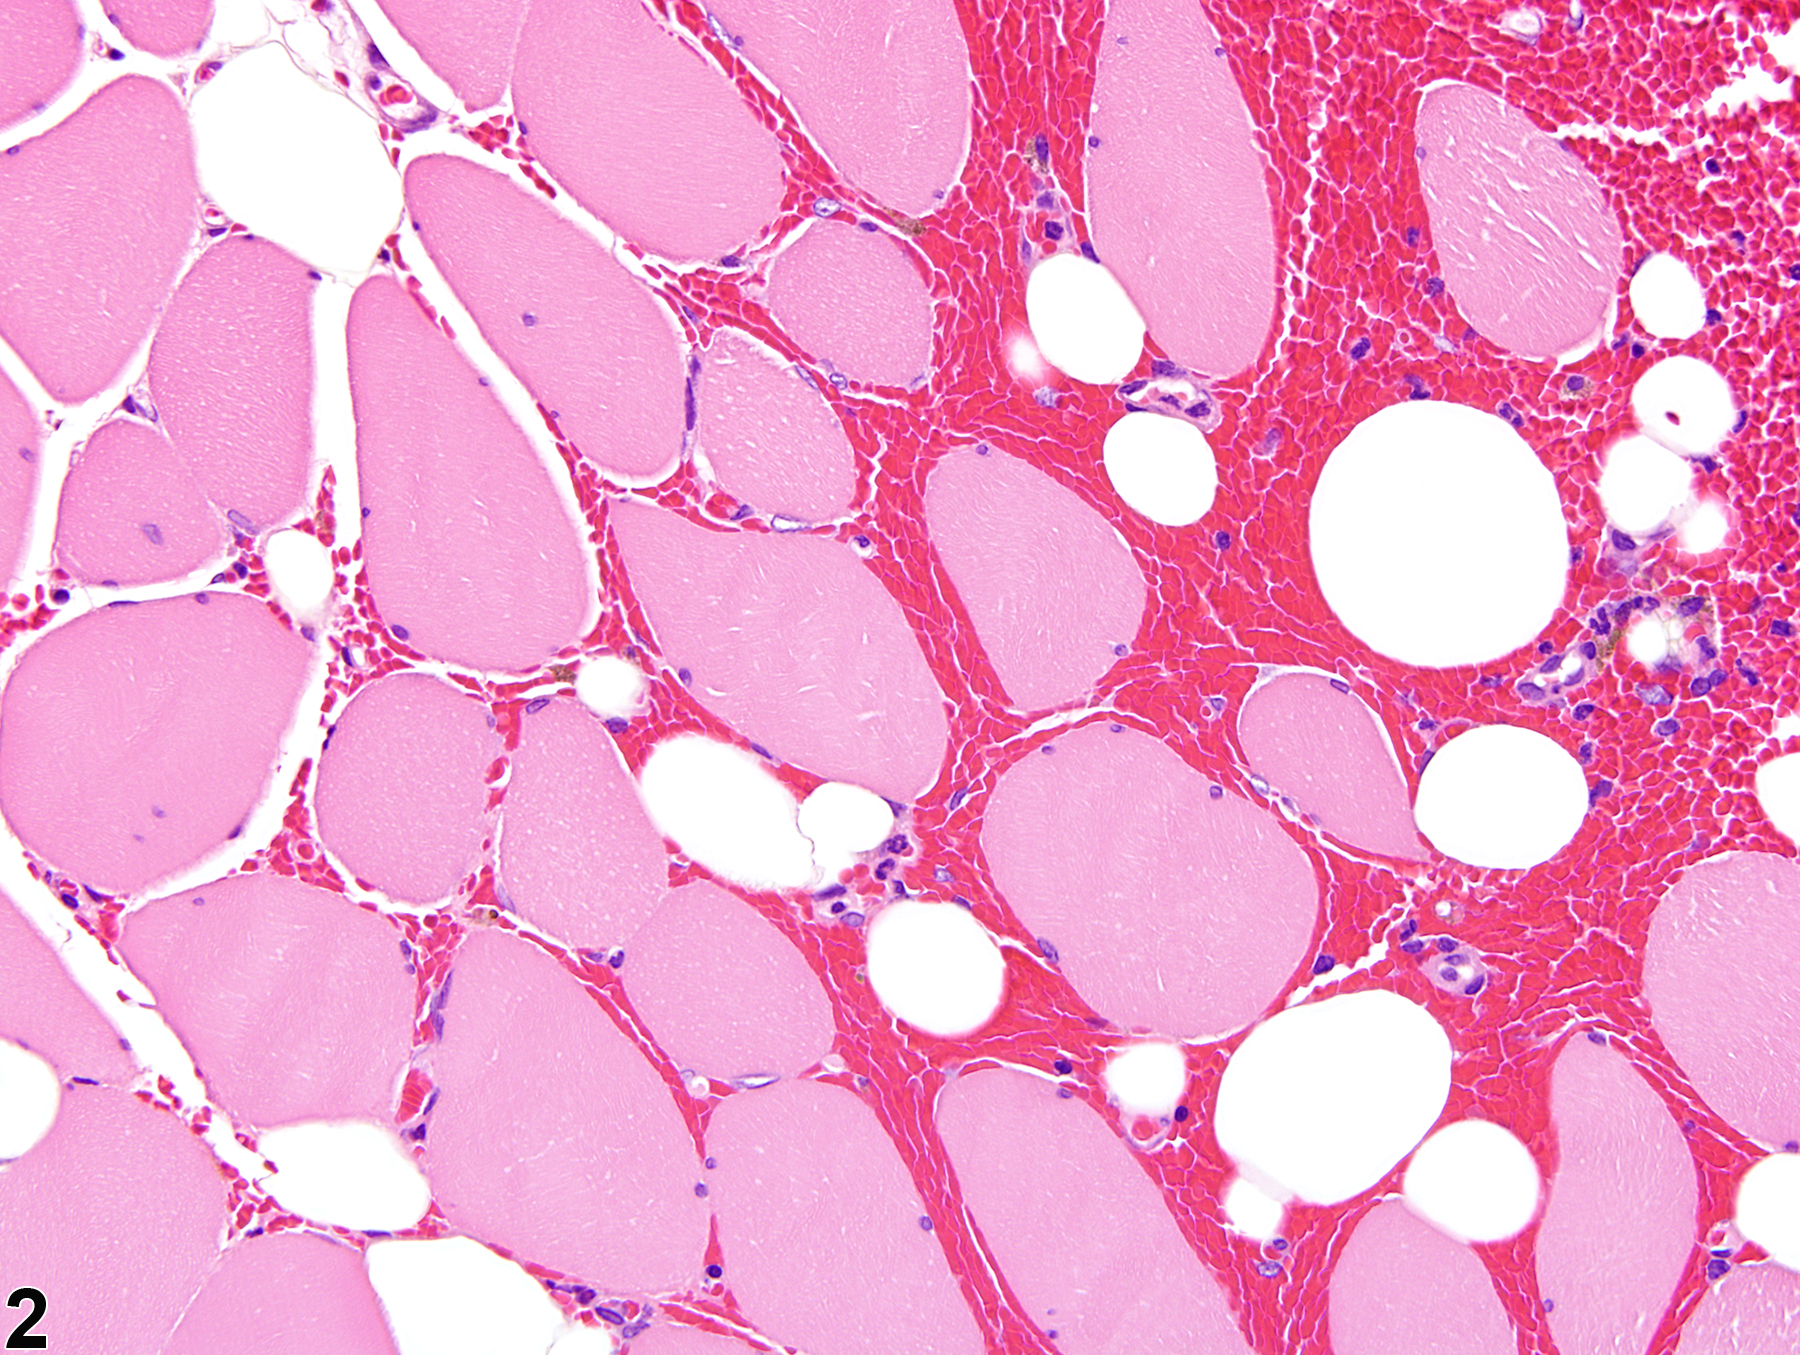 Image of hemorrhage in the skeletal muscle from a male F344/N rat in a chronic study